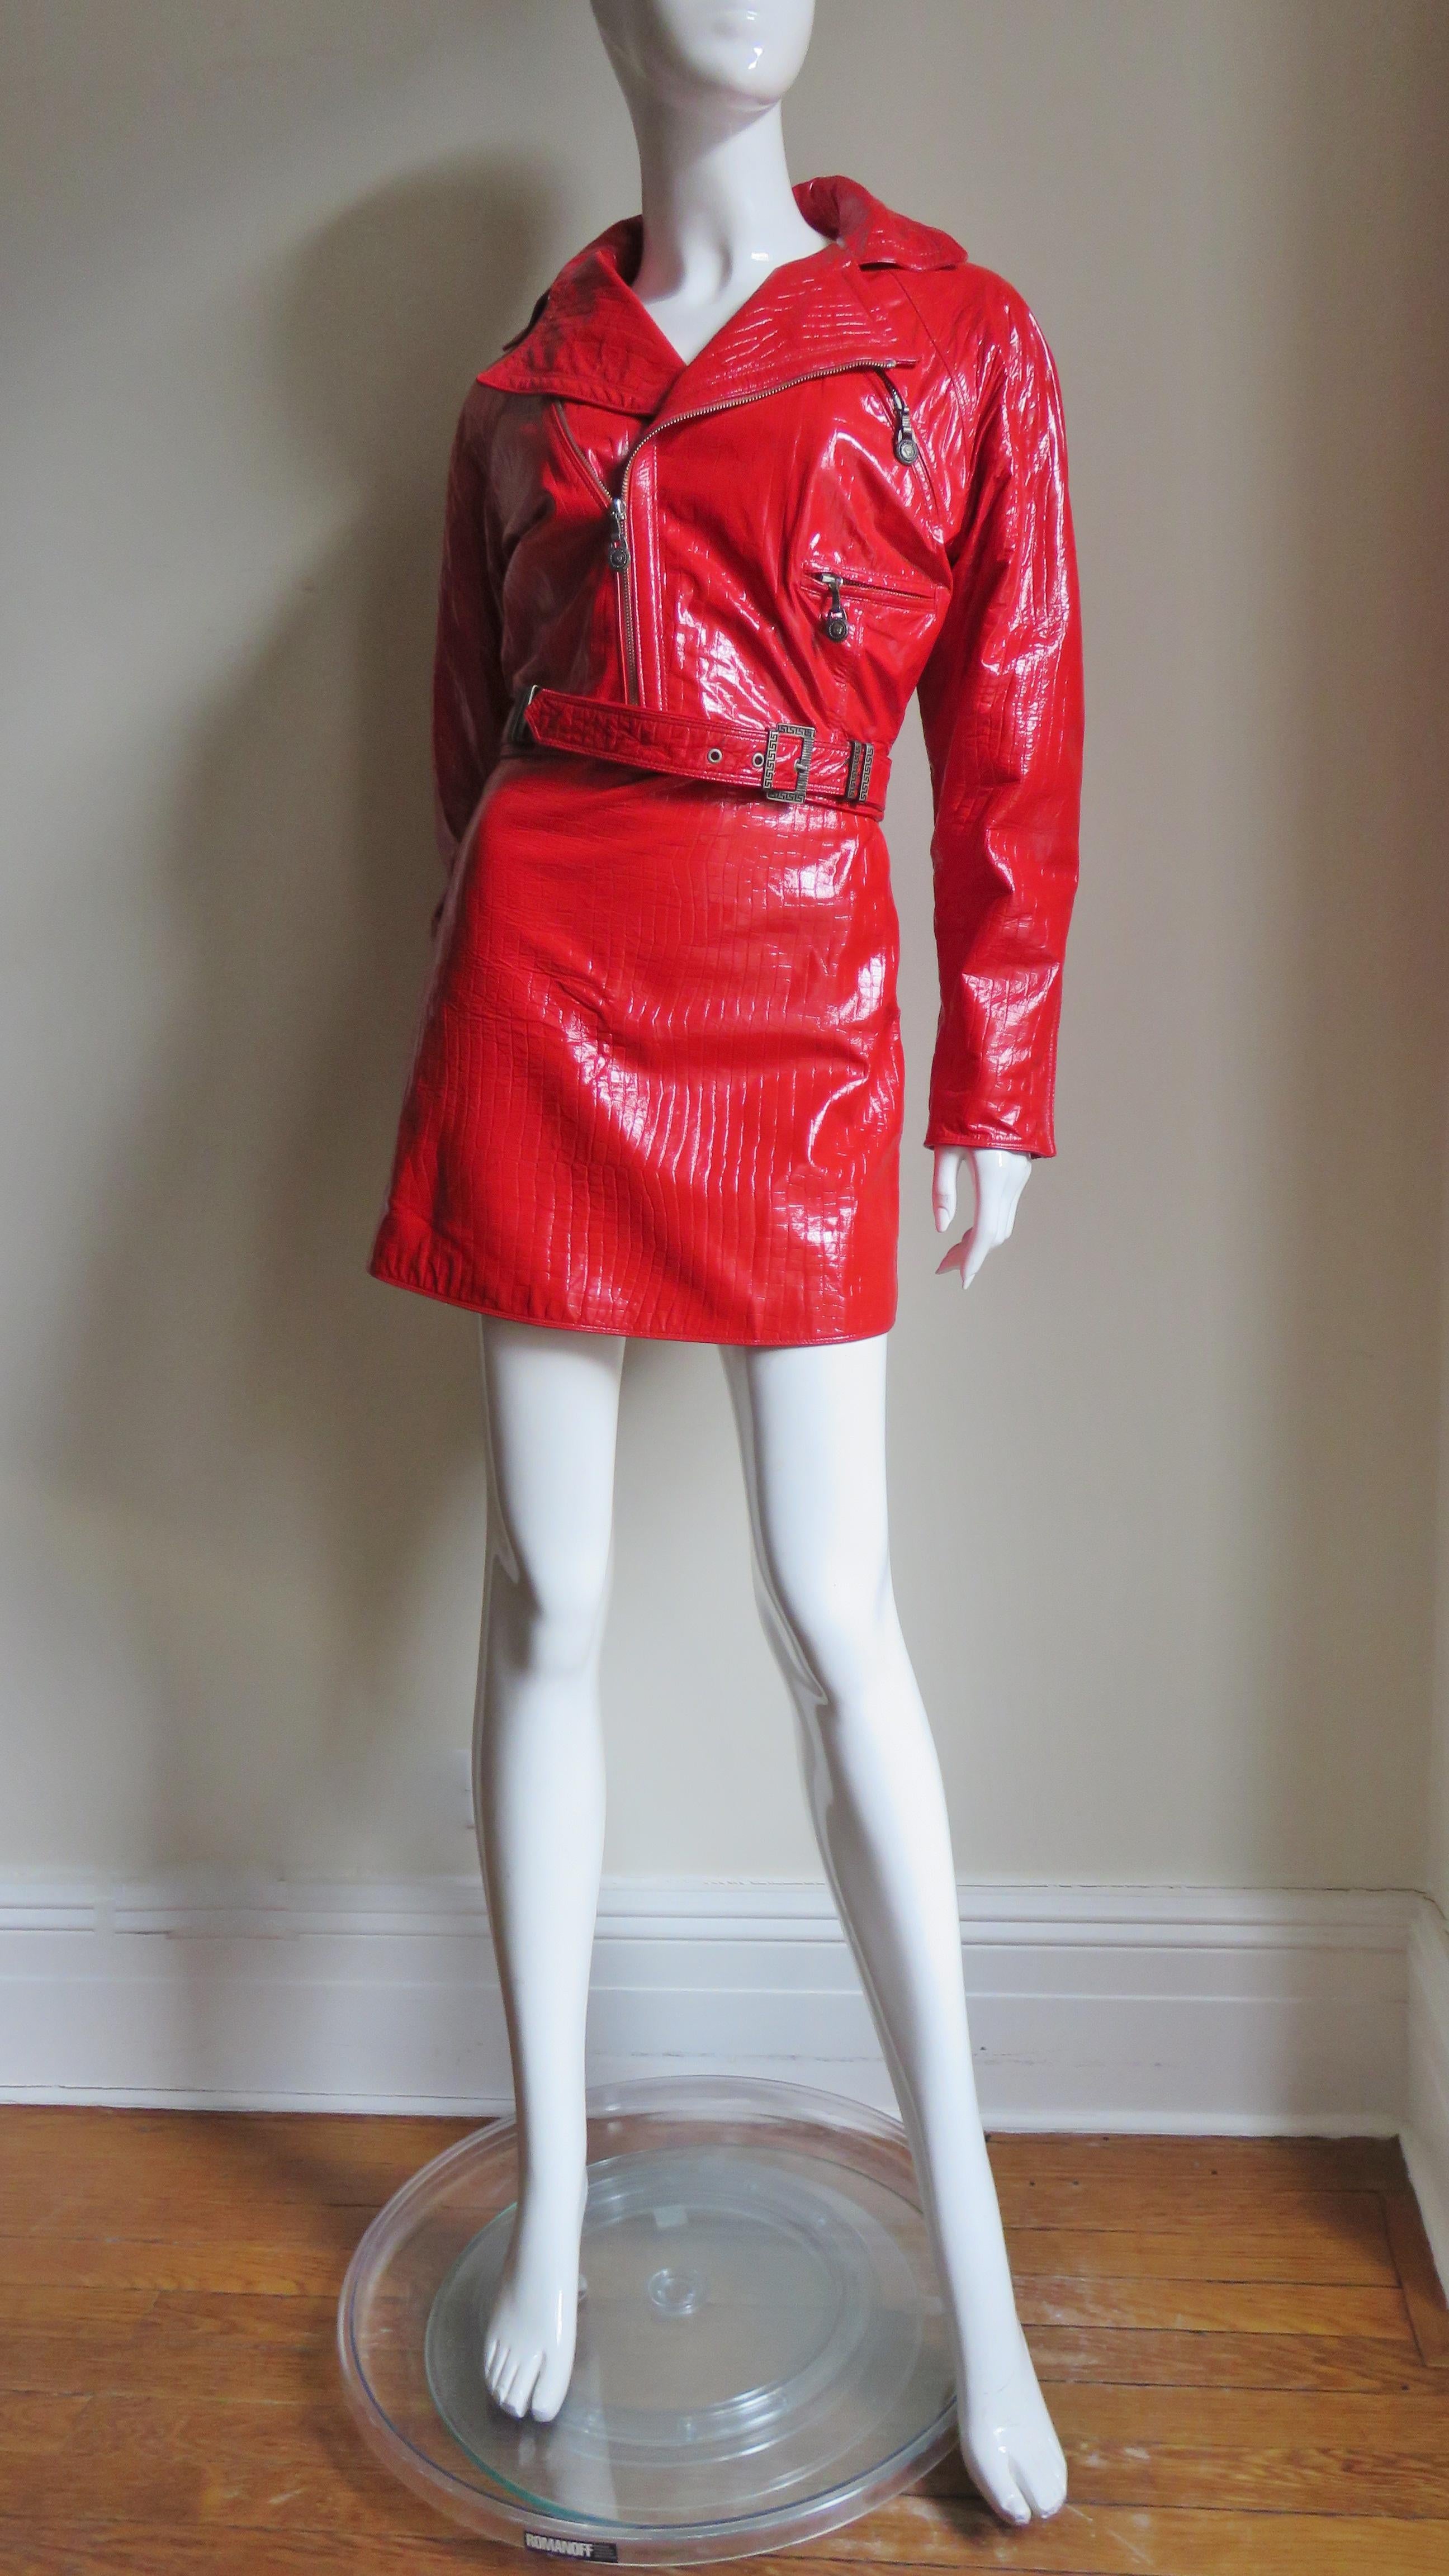 Gianni Versace Red Leather Motorcycle Jacket and Skirt A/W 1994 For Sale 1